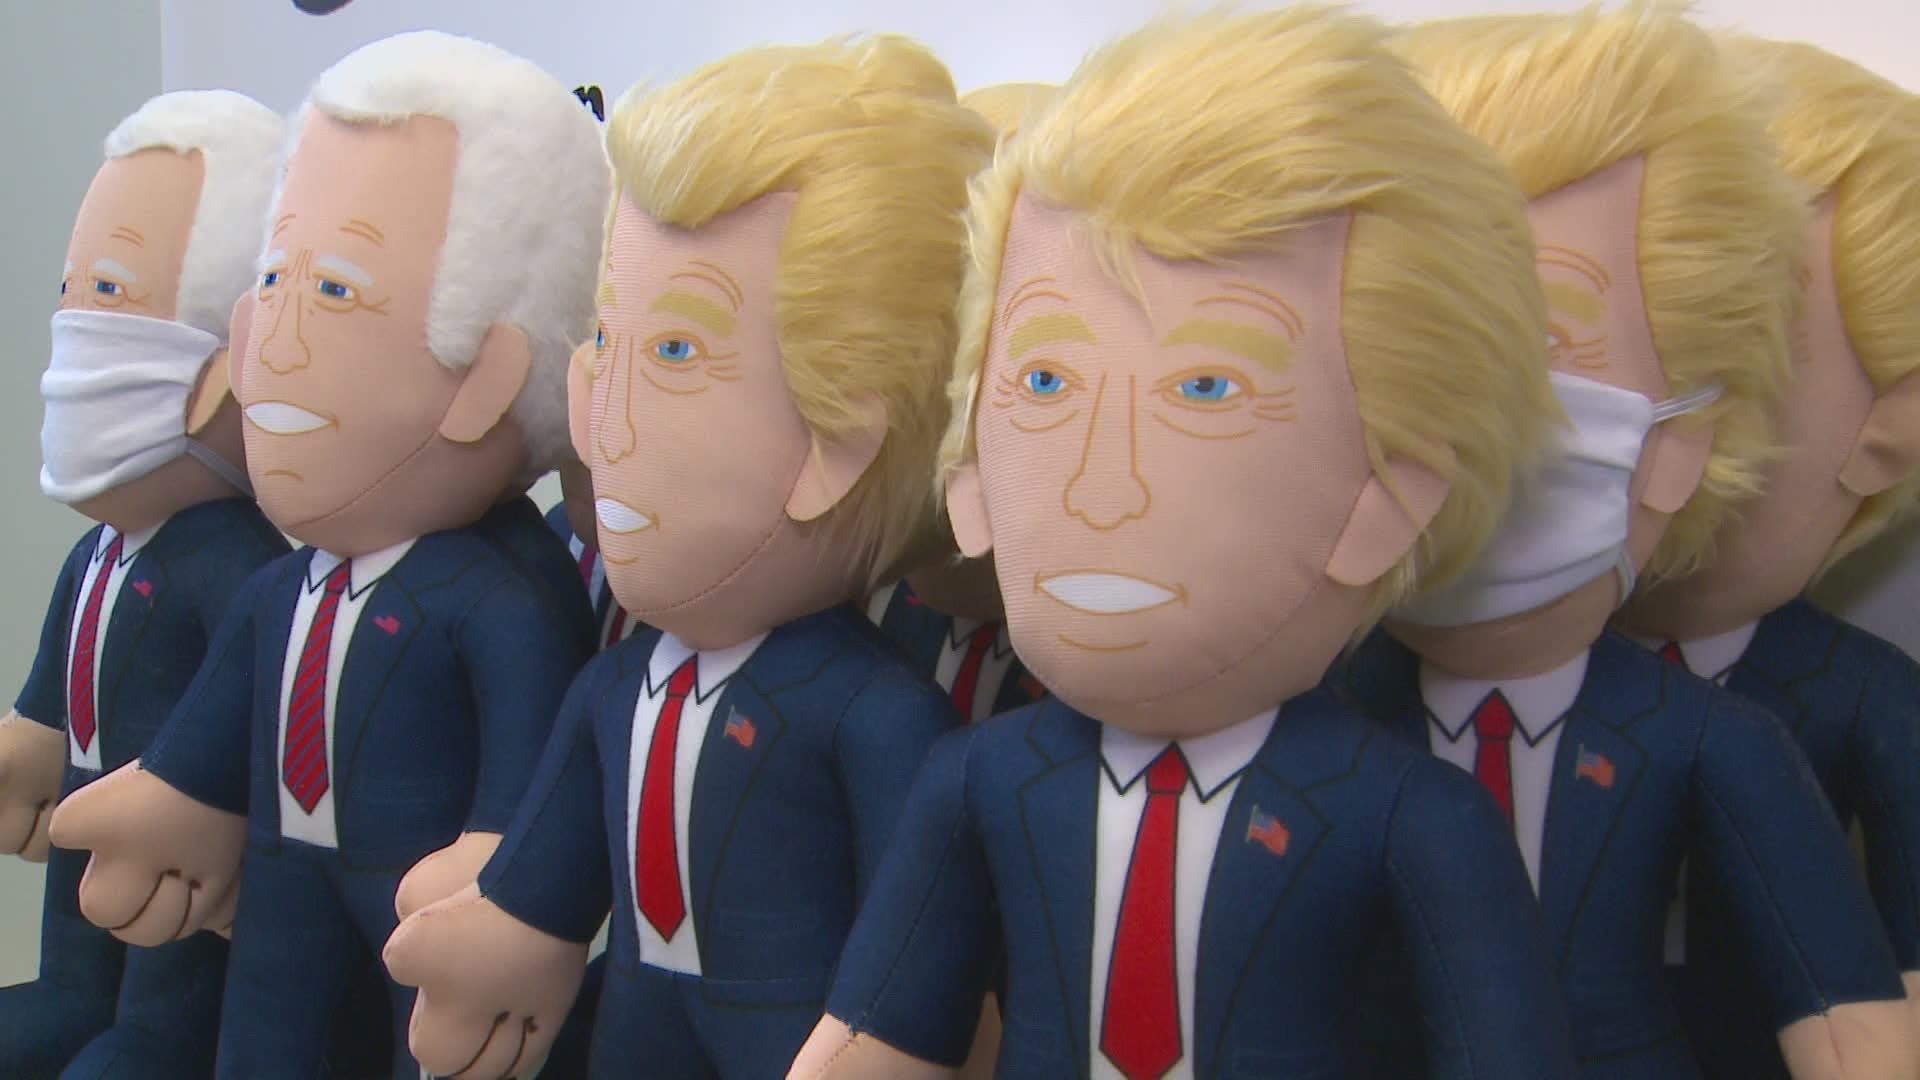 From an office he also has in Avon, Josh Livingston, the owner of New England Toy just released the limited edition, one foot tall Donald Trump and Joe Biden dolls